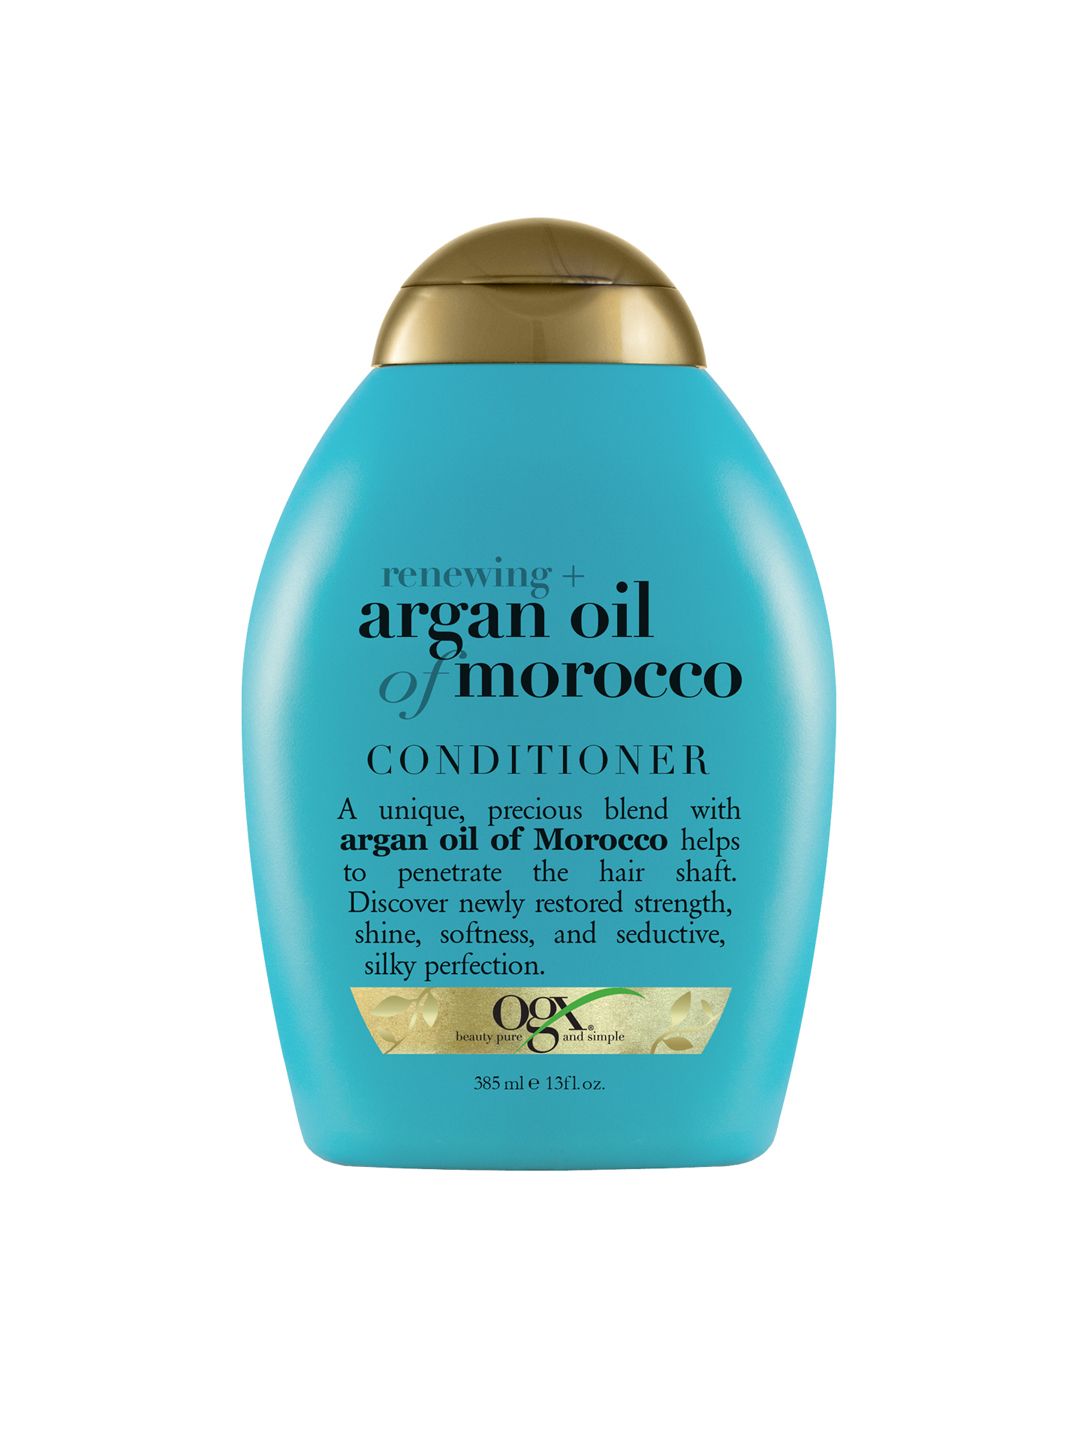 OGX Renewing Argan Oil of Morocco Conditioner 385 ml Price in India